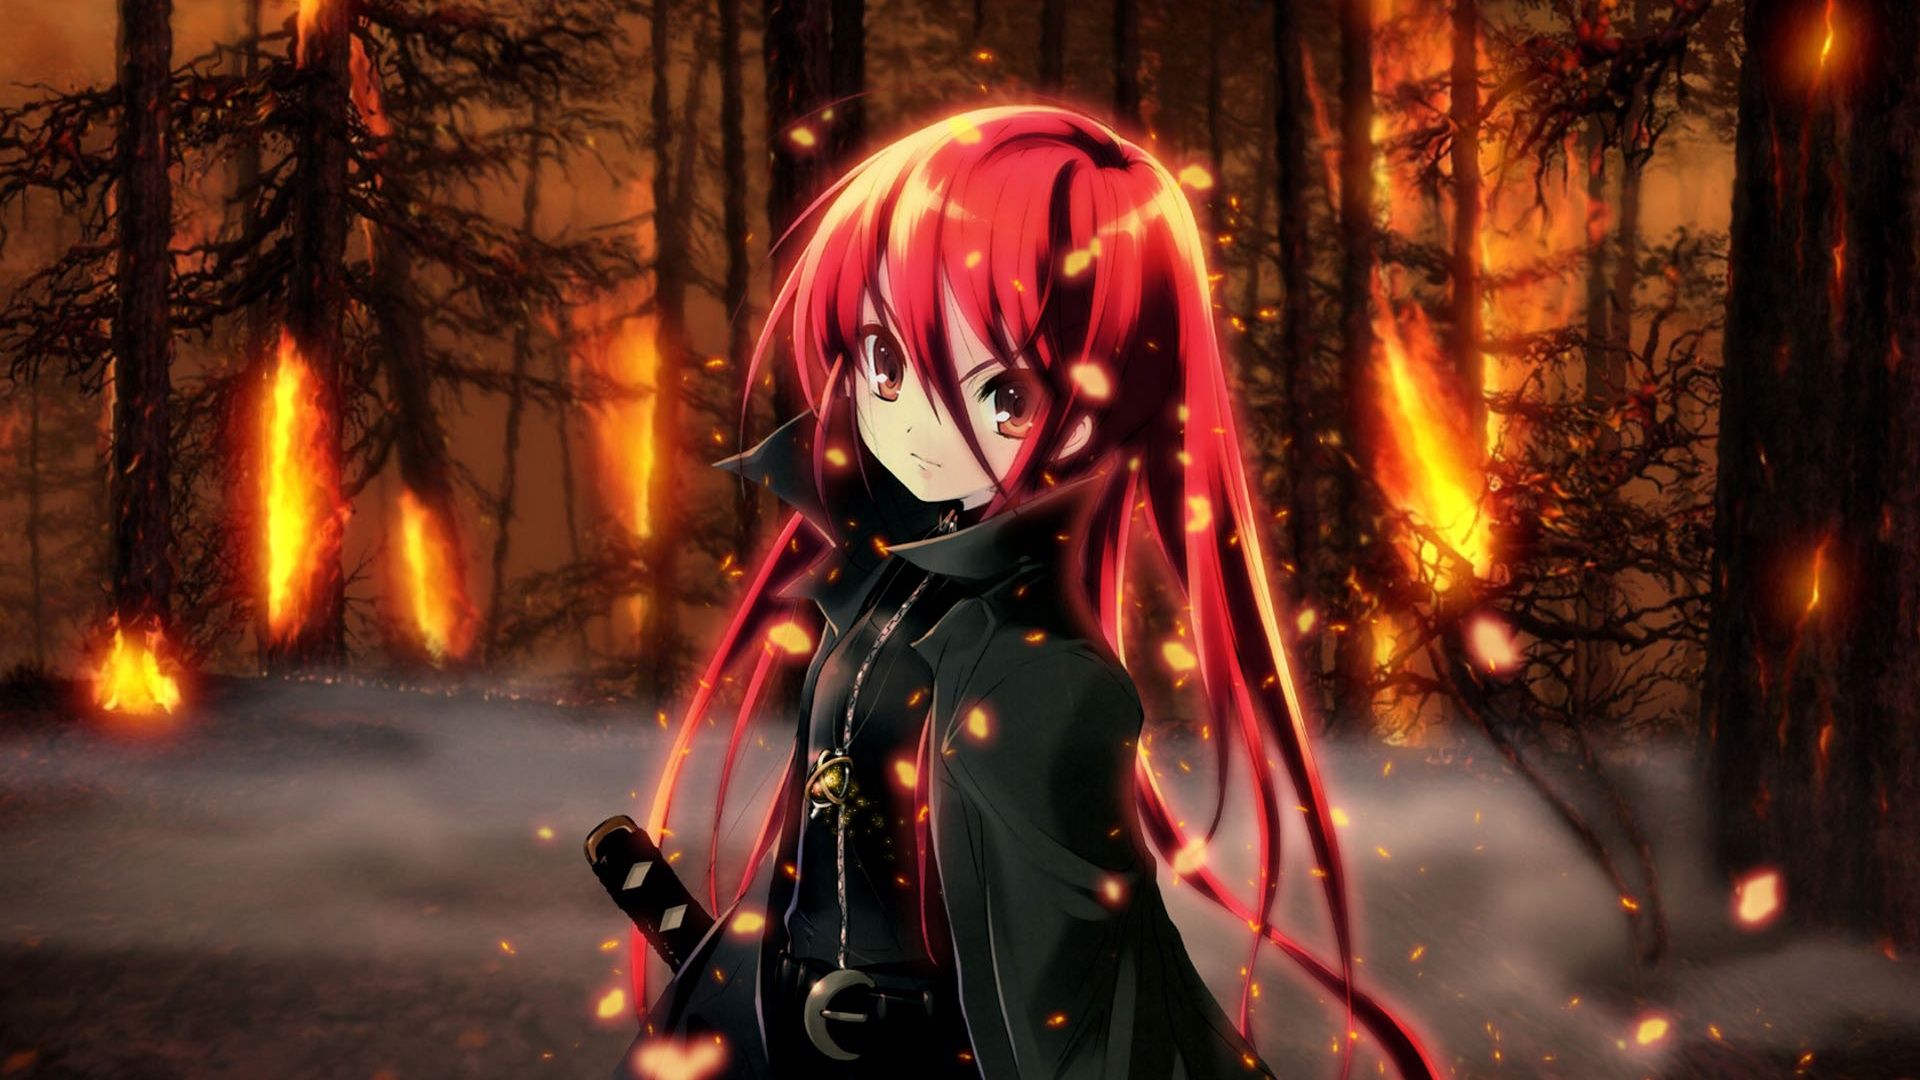 In The Forest Of Red Hair Anime Girl 640x1136 IPhone 5 5S 5C SE Wallpaper, Background, Picture, Image